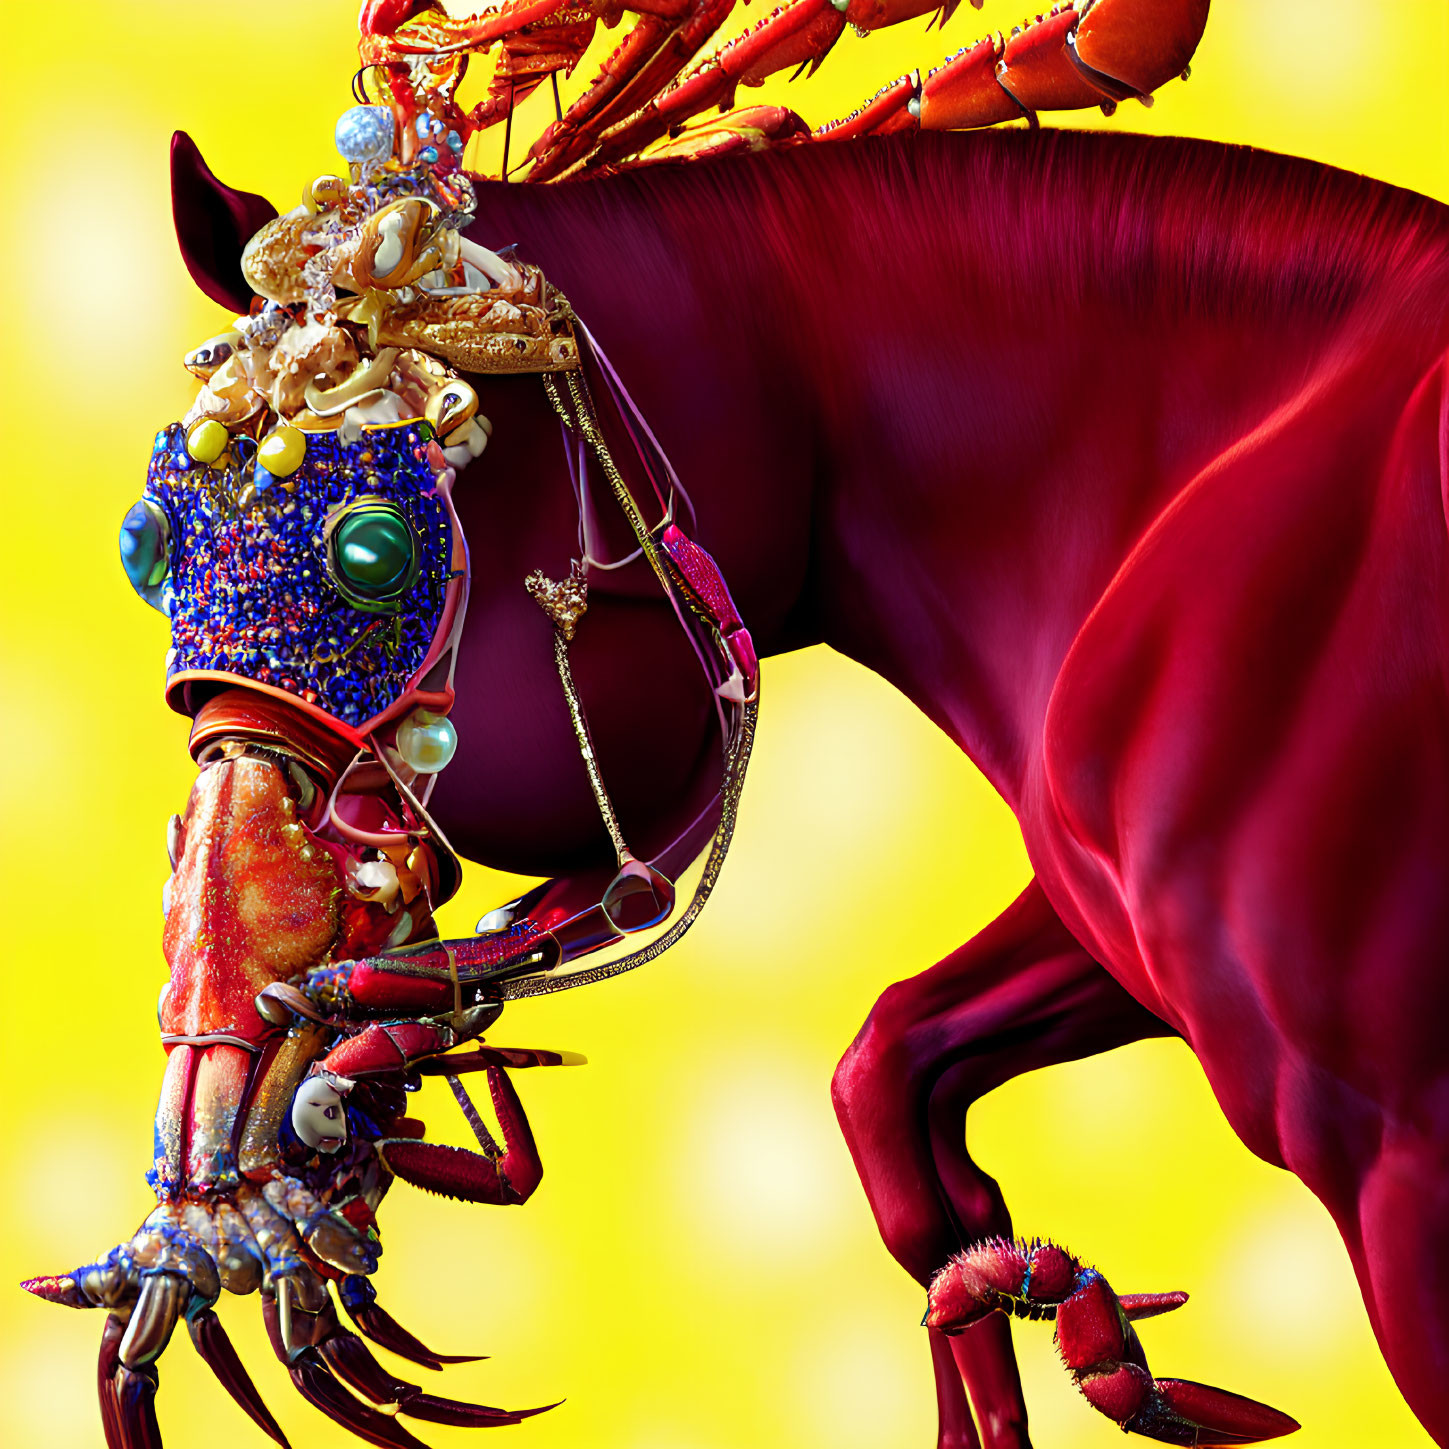 Surreal lobster with trinkets on its back riding red bull on yellow background